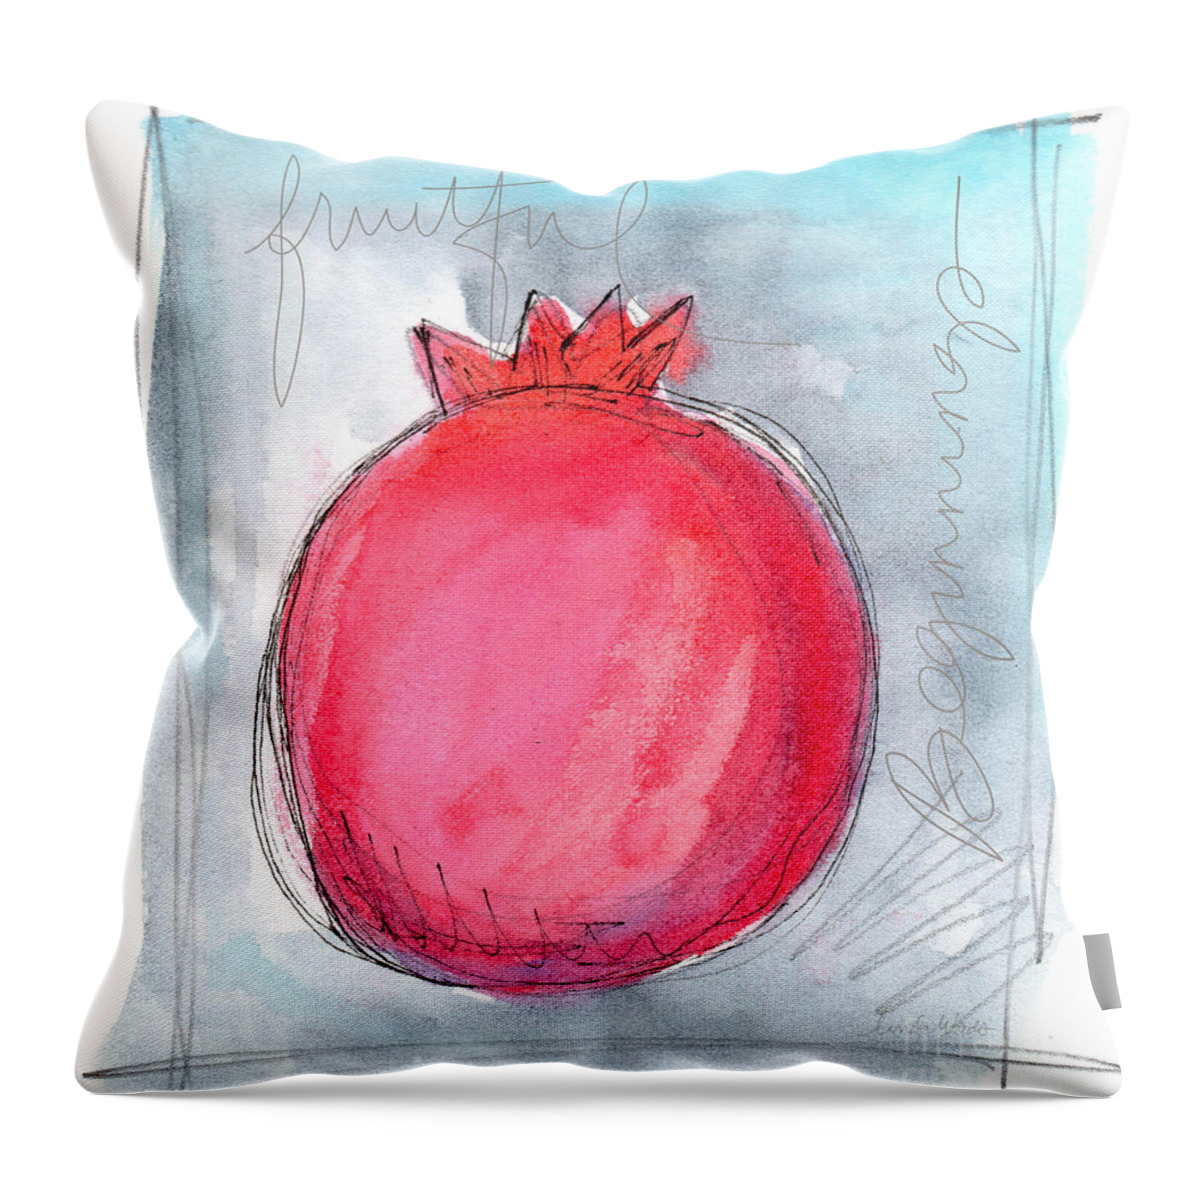 Pomegranate Throw Pillow featuring the painting Fruitful Beginning by Linda Woods